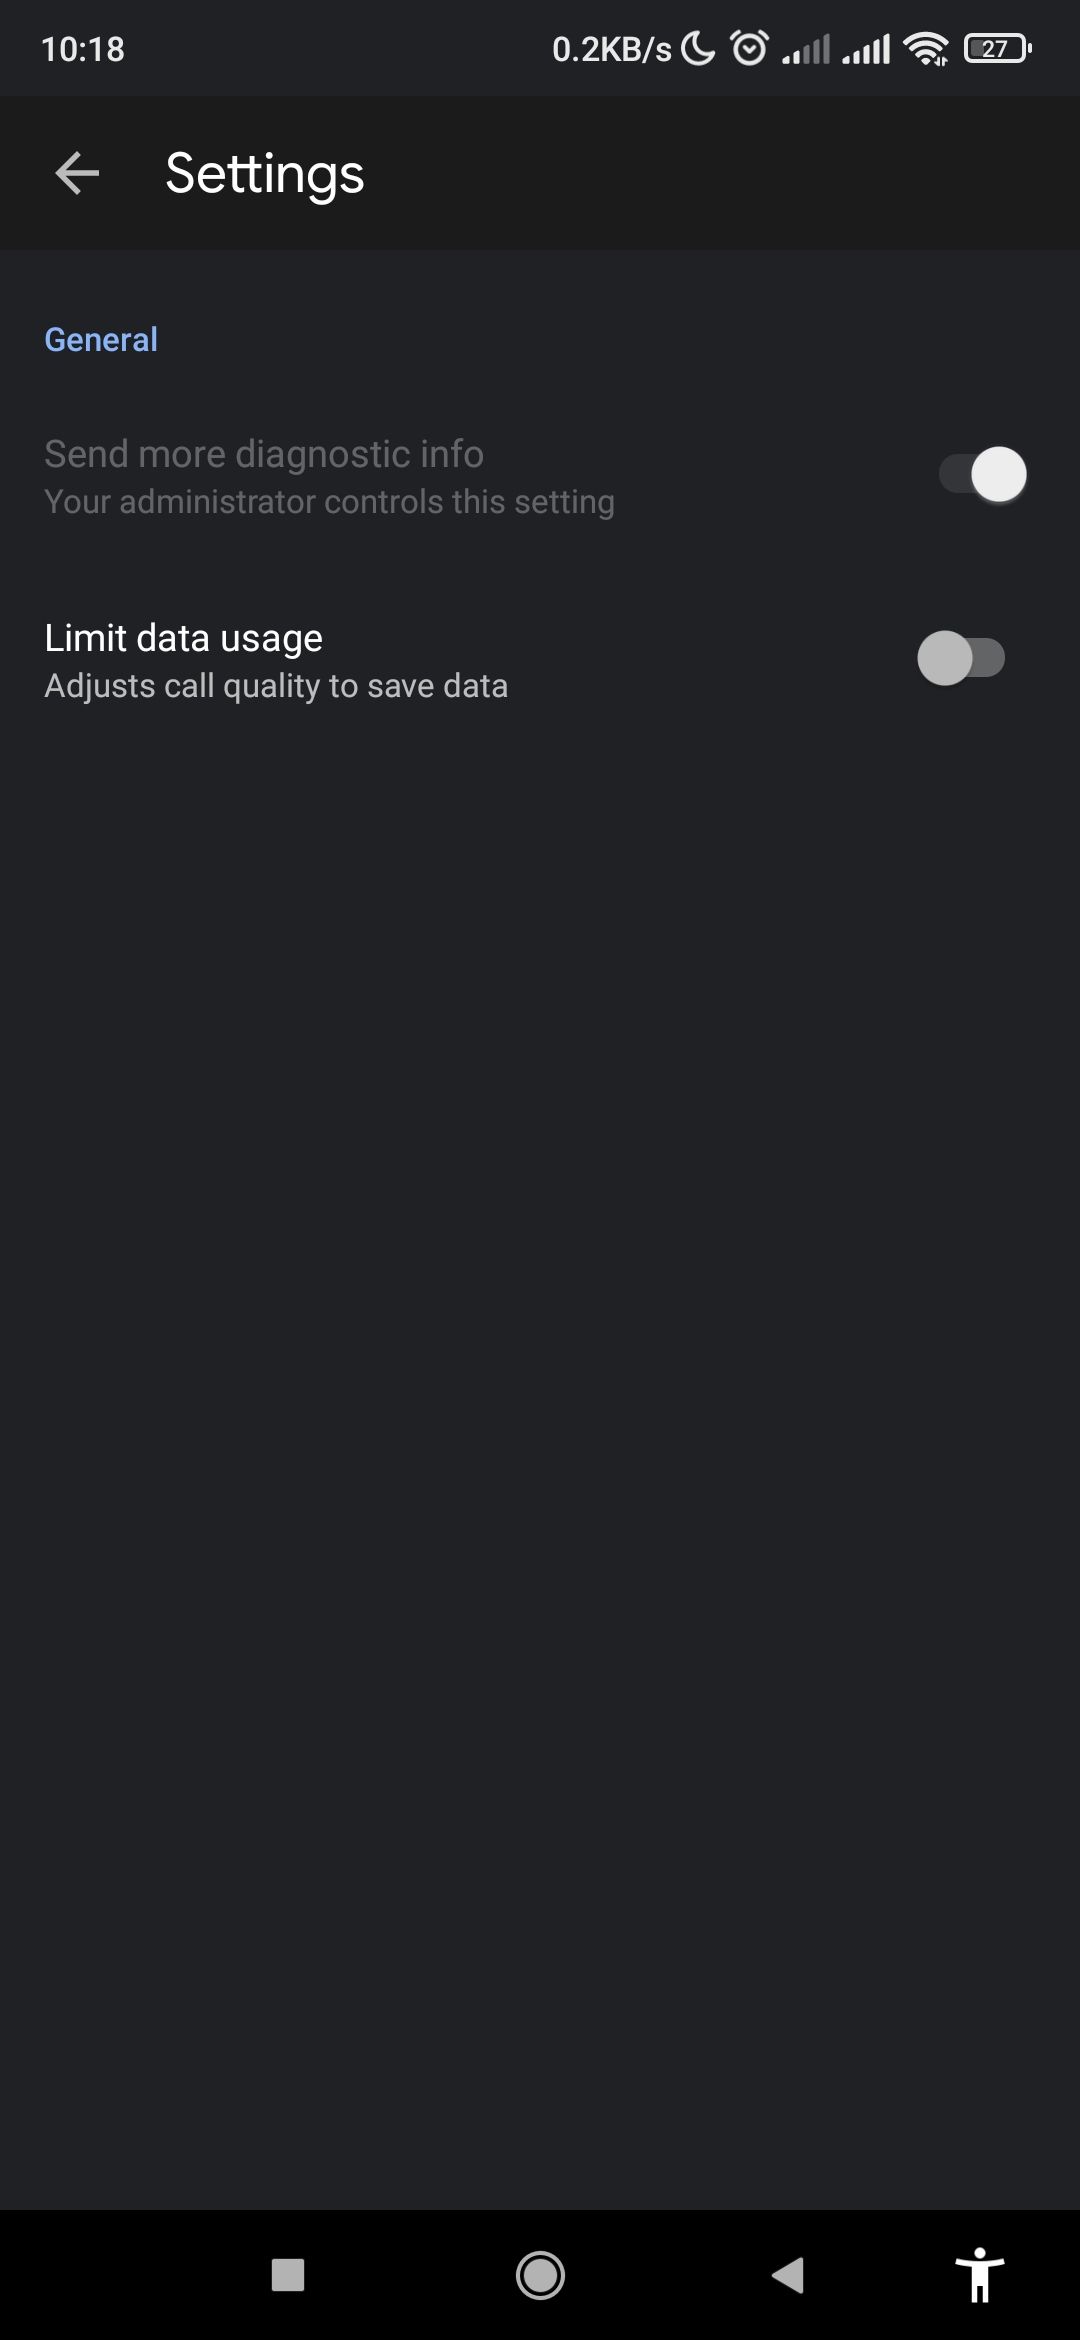 Limit data usage setting disabled in Google Meet